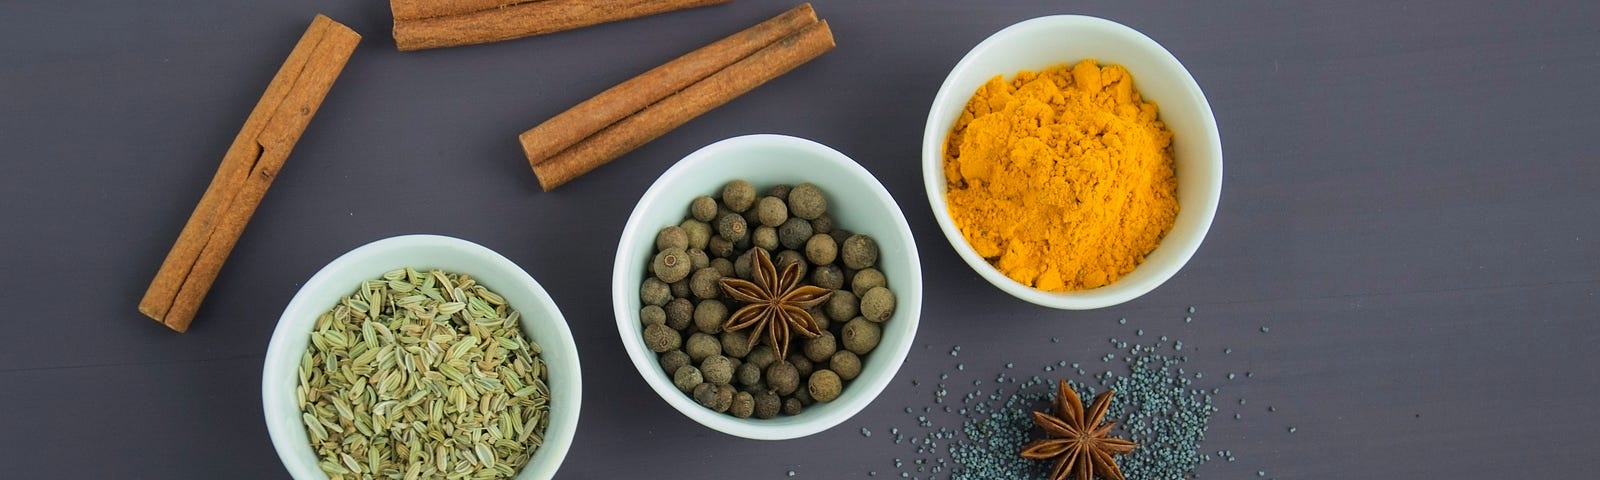 Three bowls of spices, including turmeric, along with cinnamin sticks